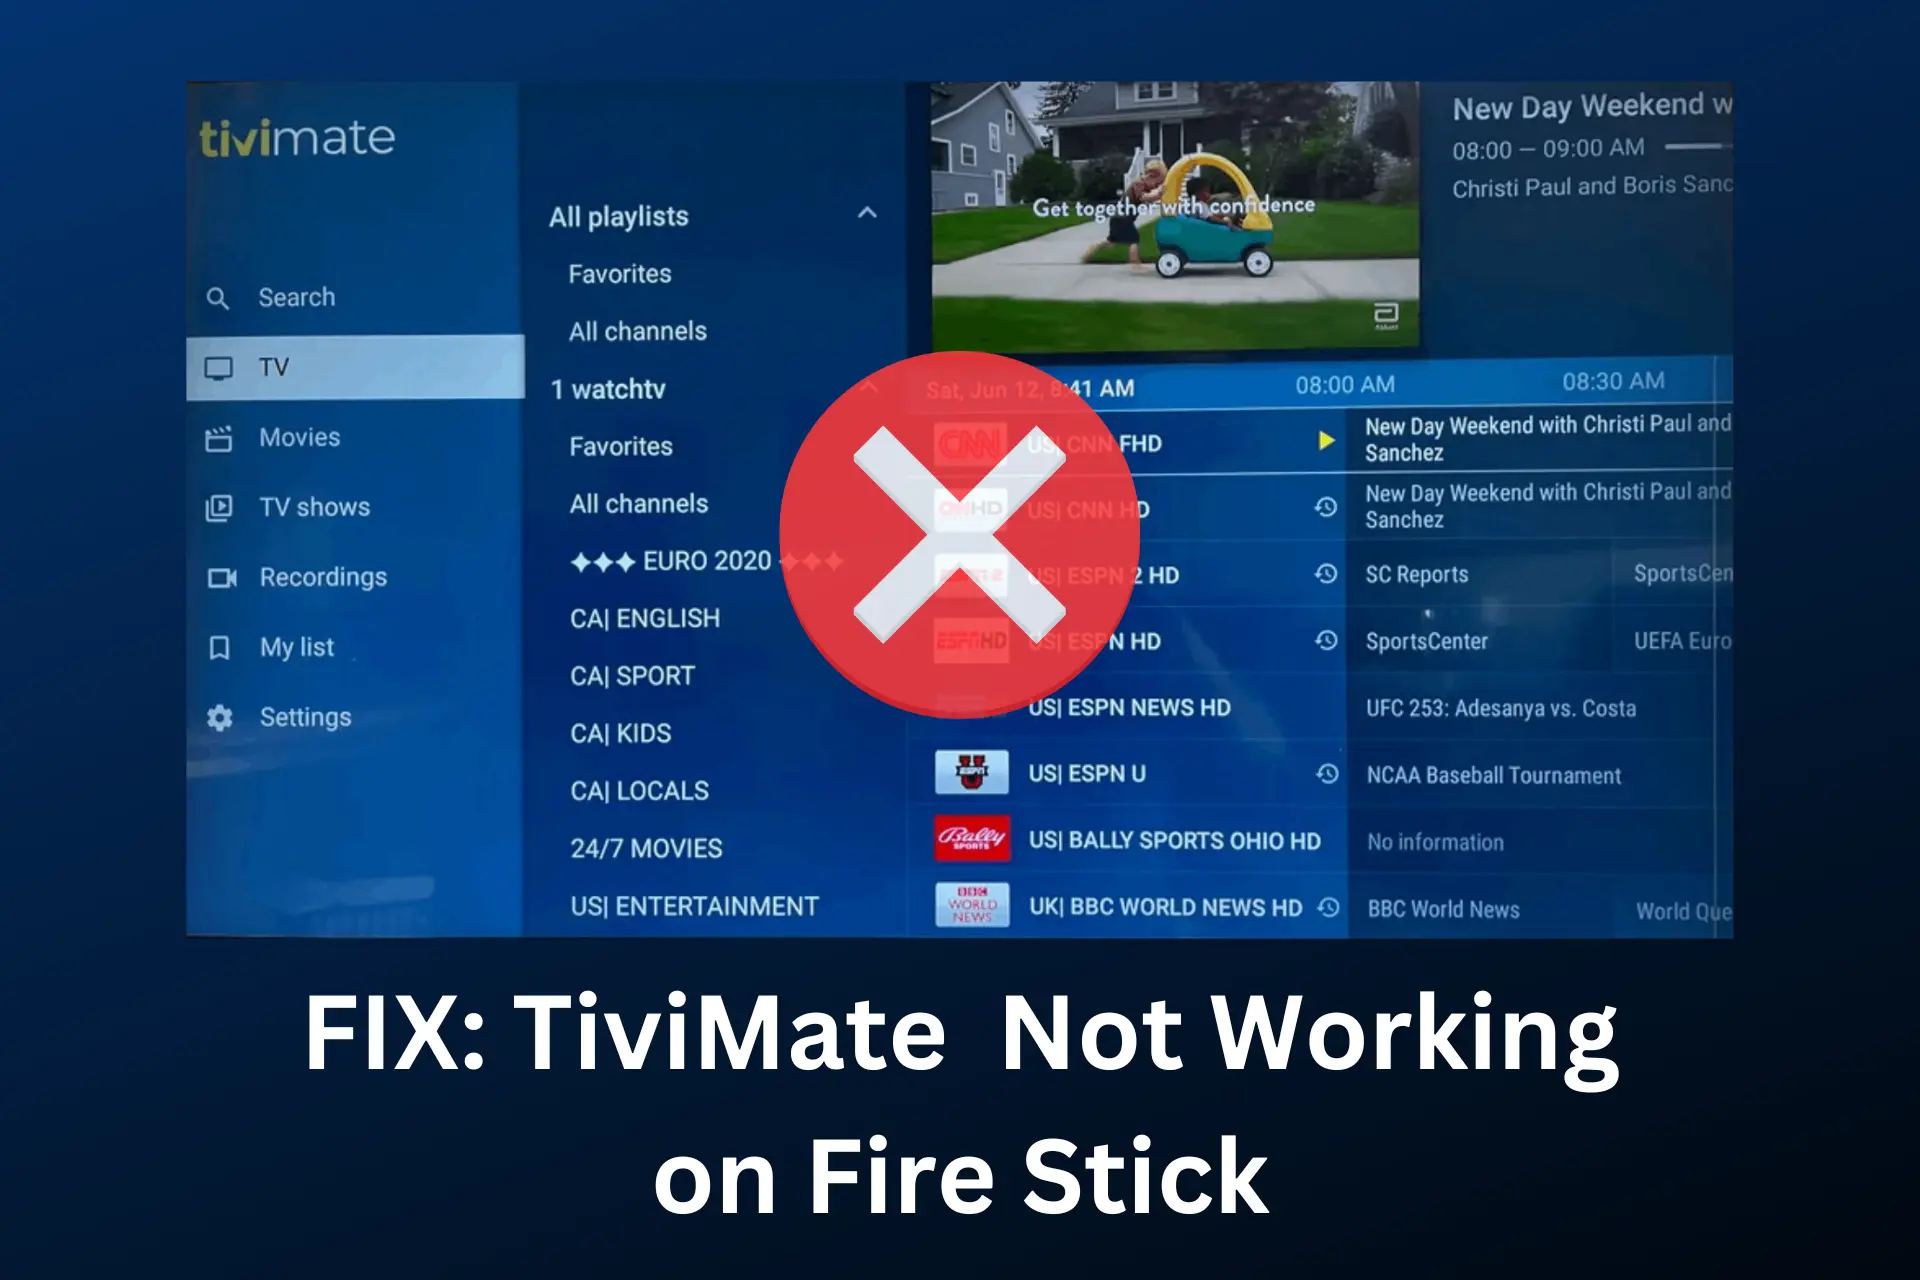 TiviMate Not Working on Fire Stick